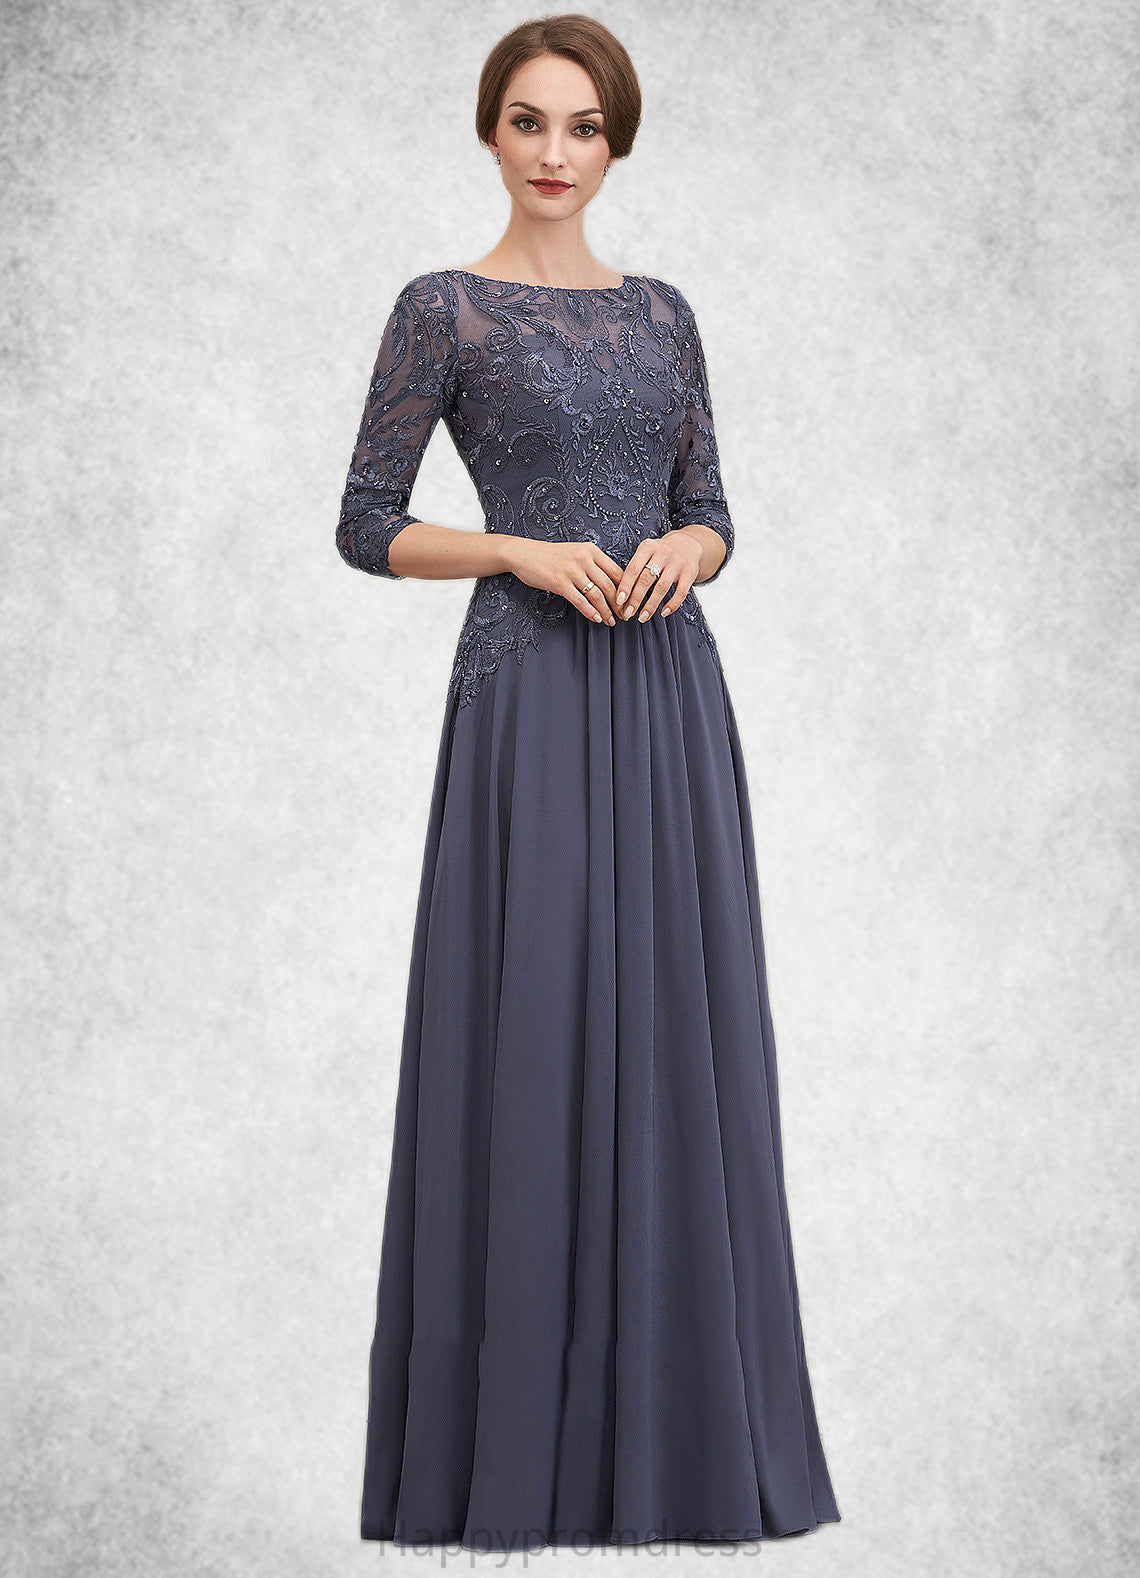 Melanie A-Line Scoop Neck Floor-Length Chiffon Lace Mother of the Bride Dress With Beading Sequins XXS126P0014578